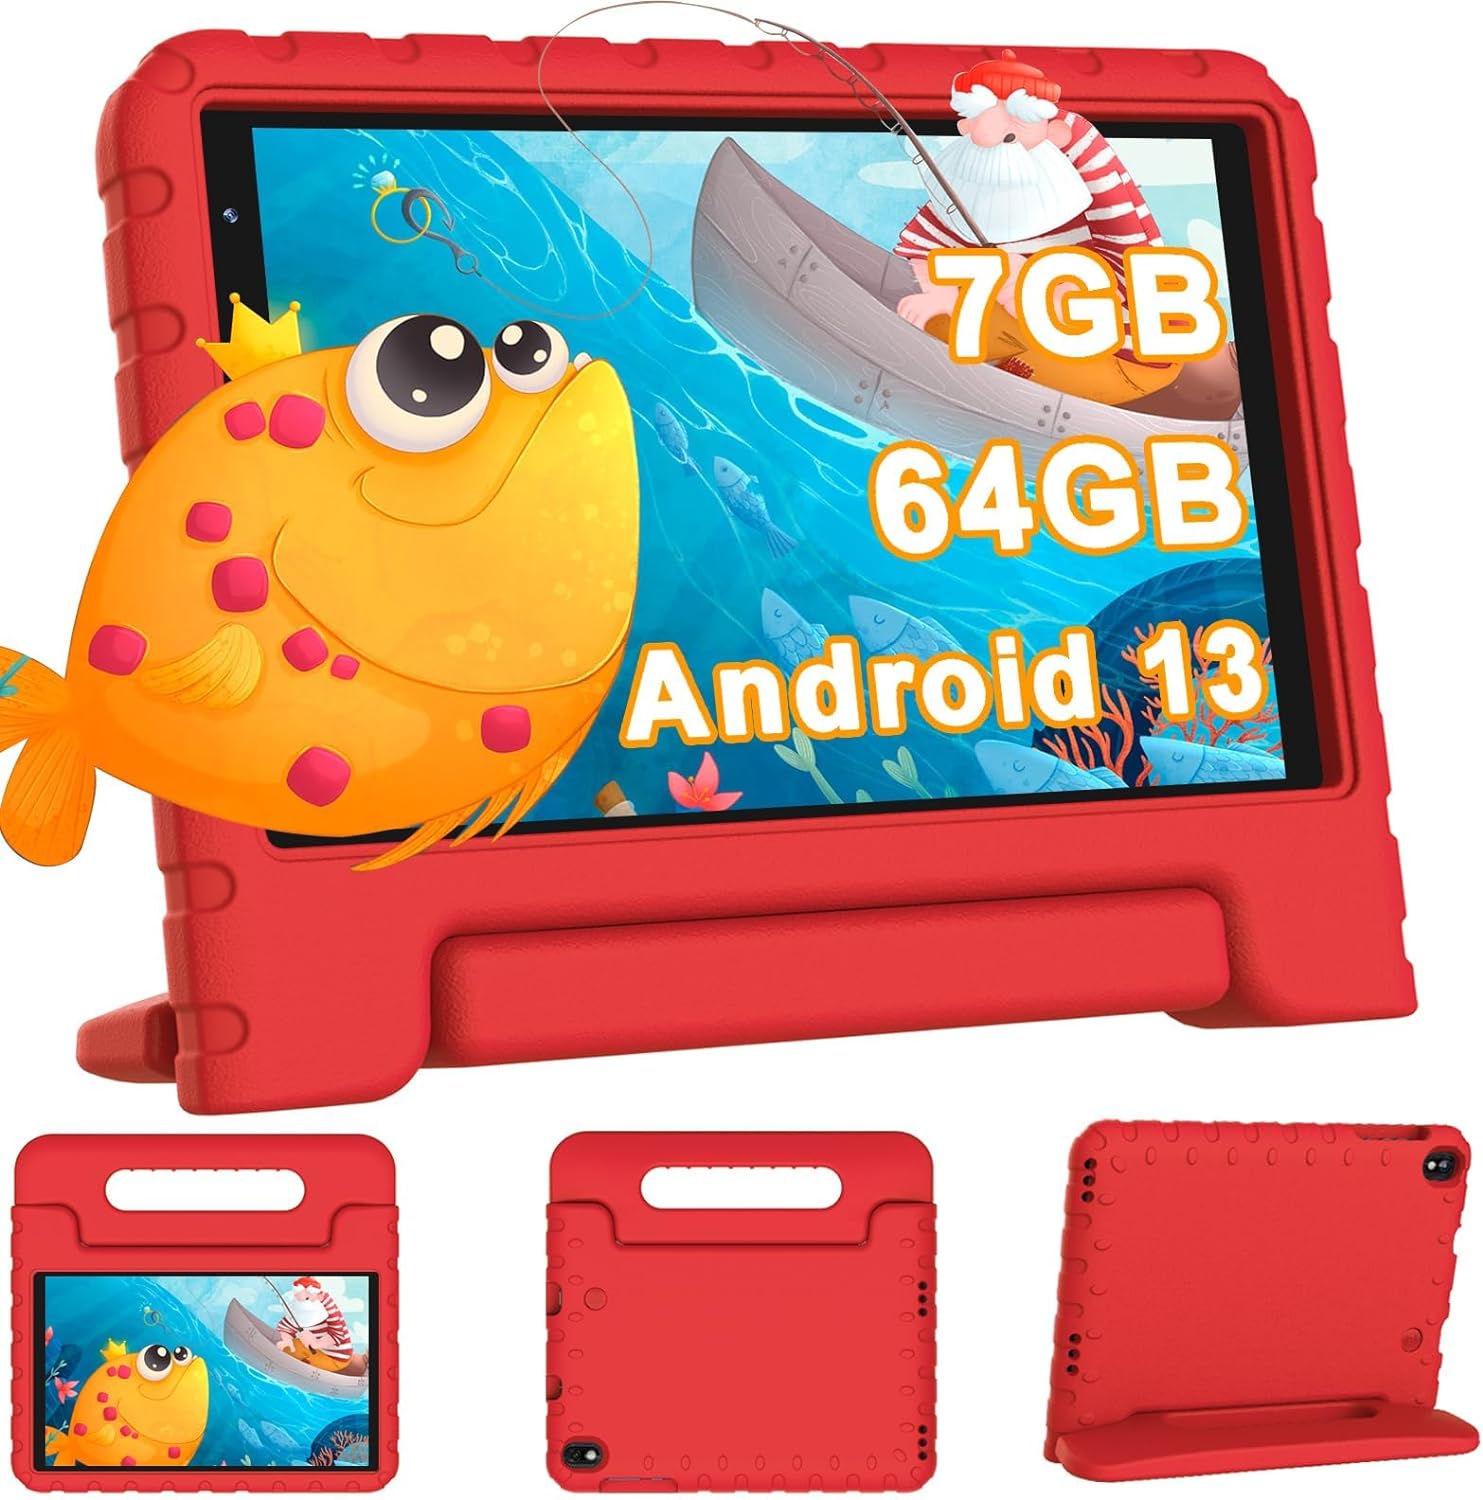 YESTEL Android 13 Kids Tablet 8 inch with 7GB RAM+64GB ROM(Expand to 1TB), WiFi 6, Bluetooth 5.0,1280 x 800 Pixels, 3600 mAh Battery, Double Camera, GPS,with Child-Proof Case(Blue)